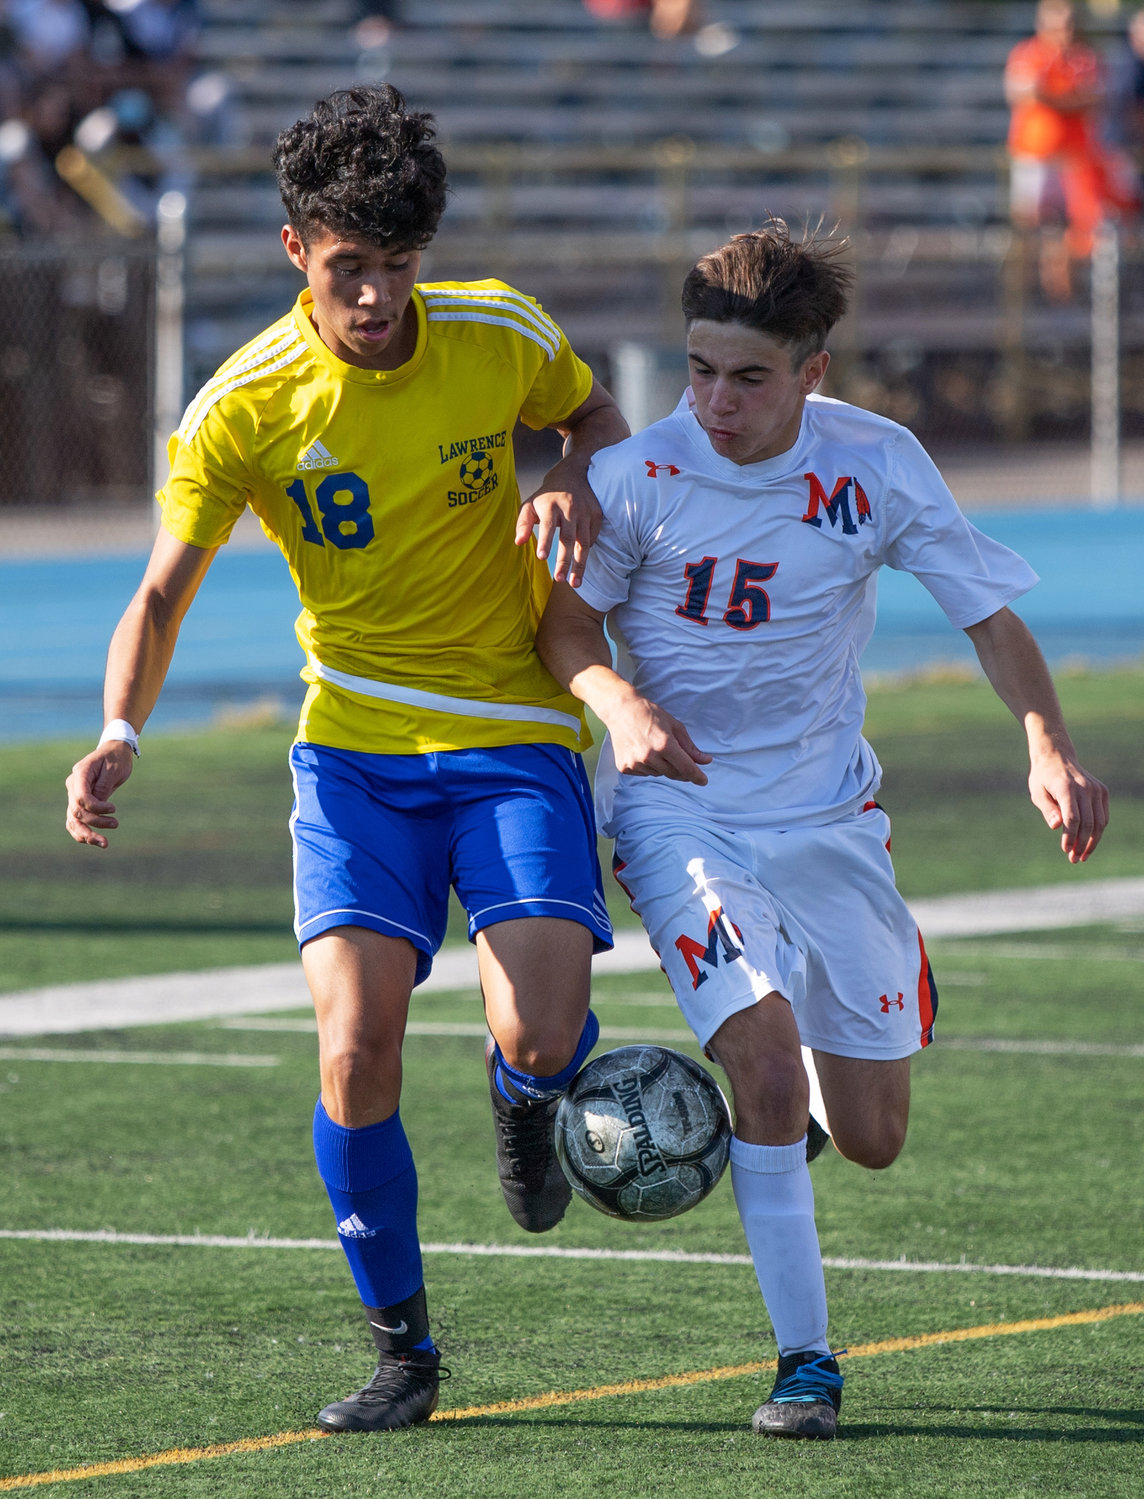 Lawrnce's Jessi Vasquez, left, and Manhasset's Gianluca Milazzo battled for control of the ball during last Friday's Nassau Class A playoff matchup.